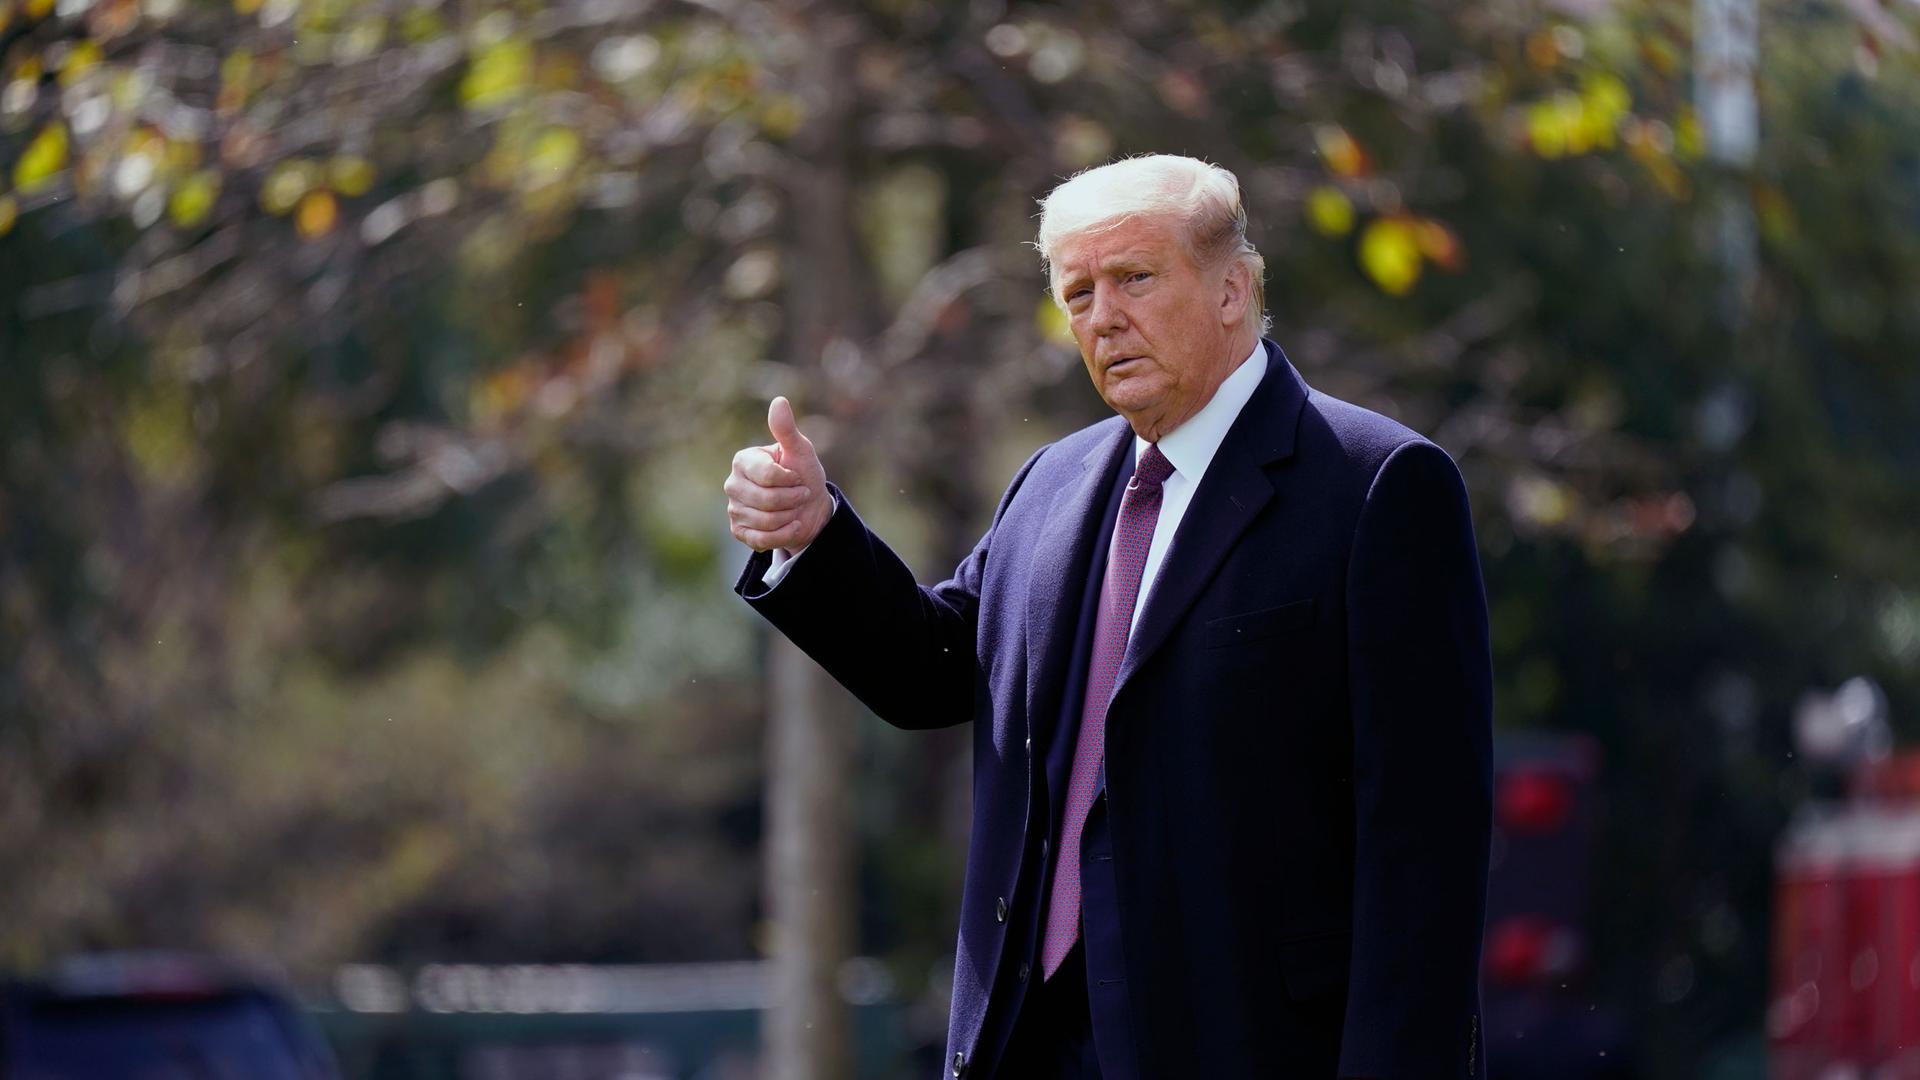 President Donald Trump is shown wearing an overcoat and purple tie and giving the thumbs-up sign.